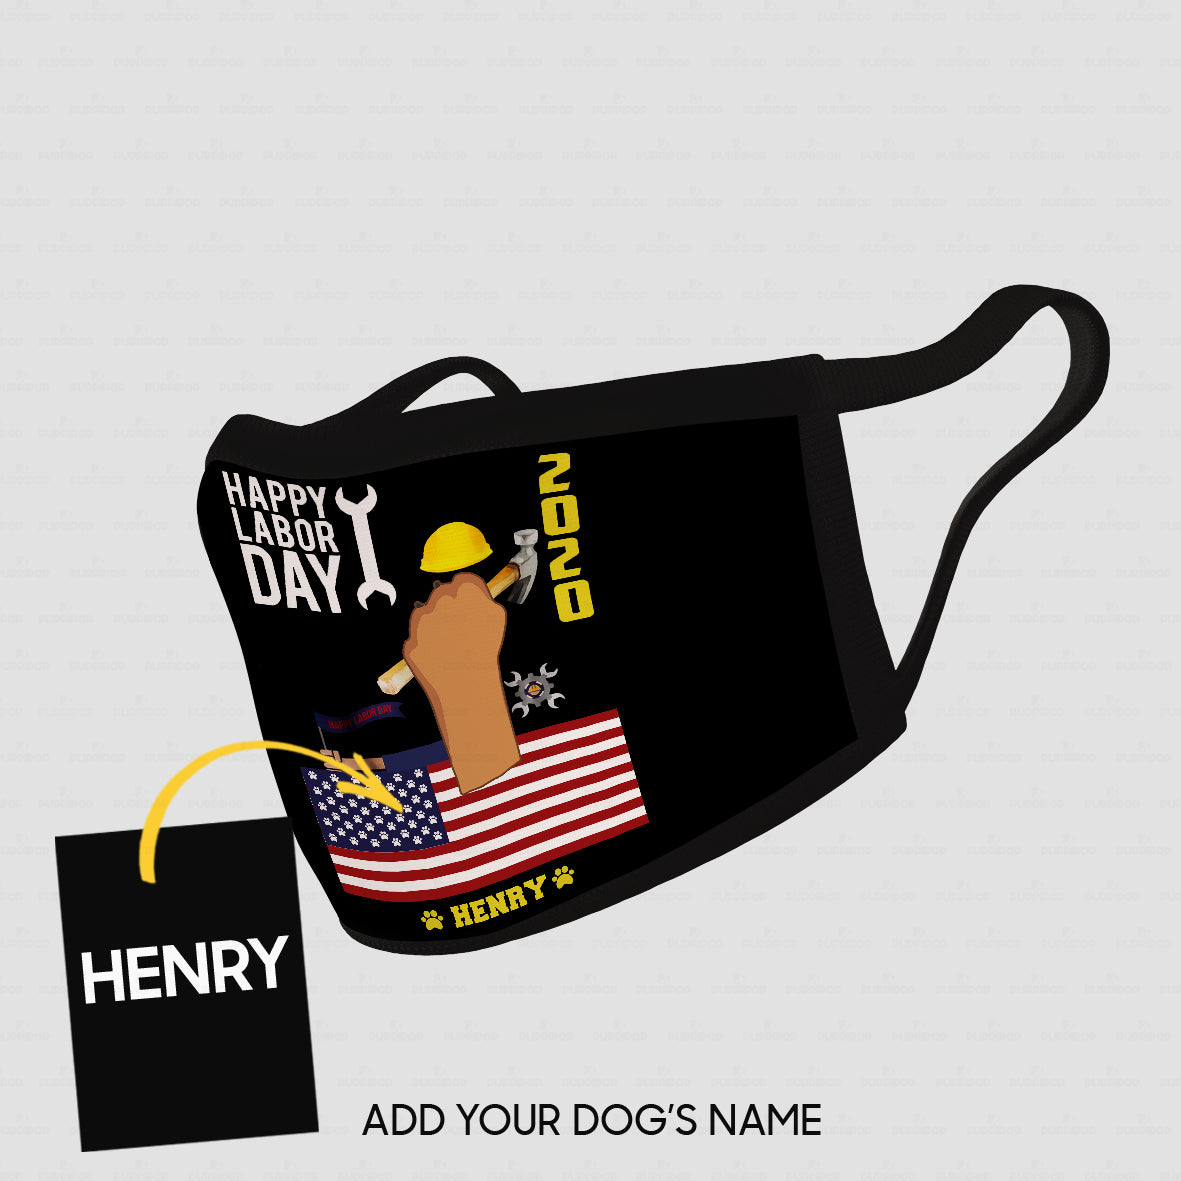 Personalized Dog Gift Idea - Happy Labor Day 2020 For Dog Lovers - Cloth Mask